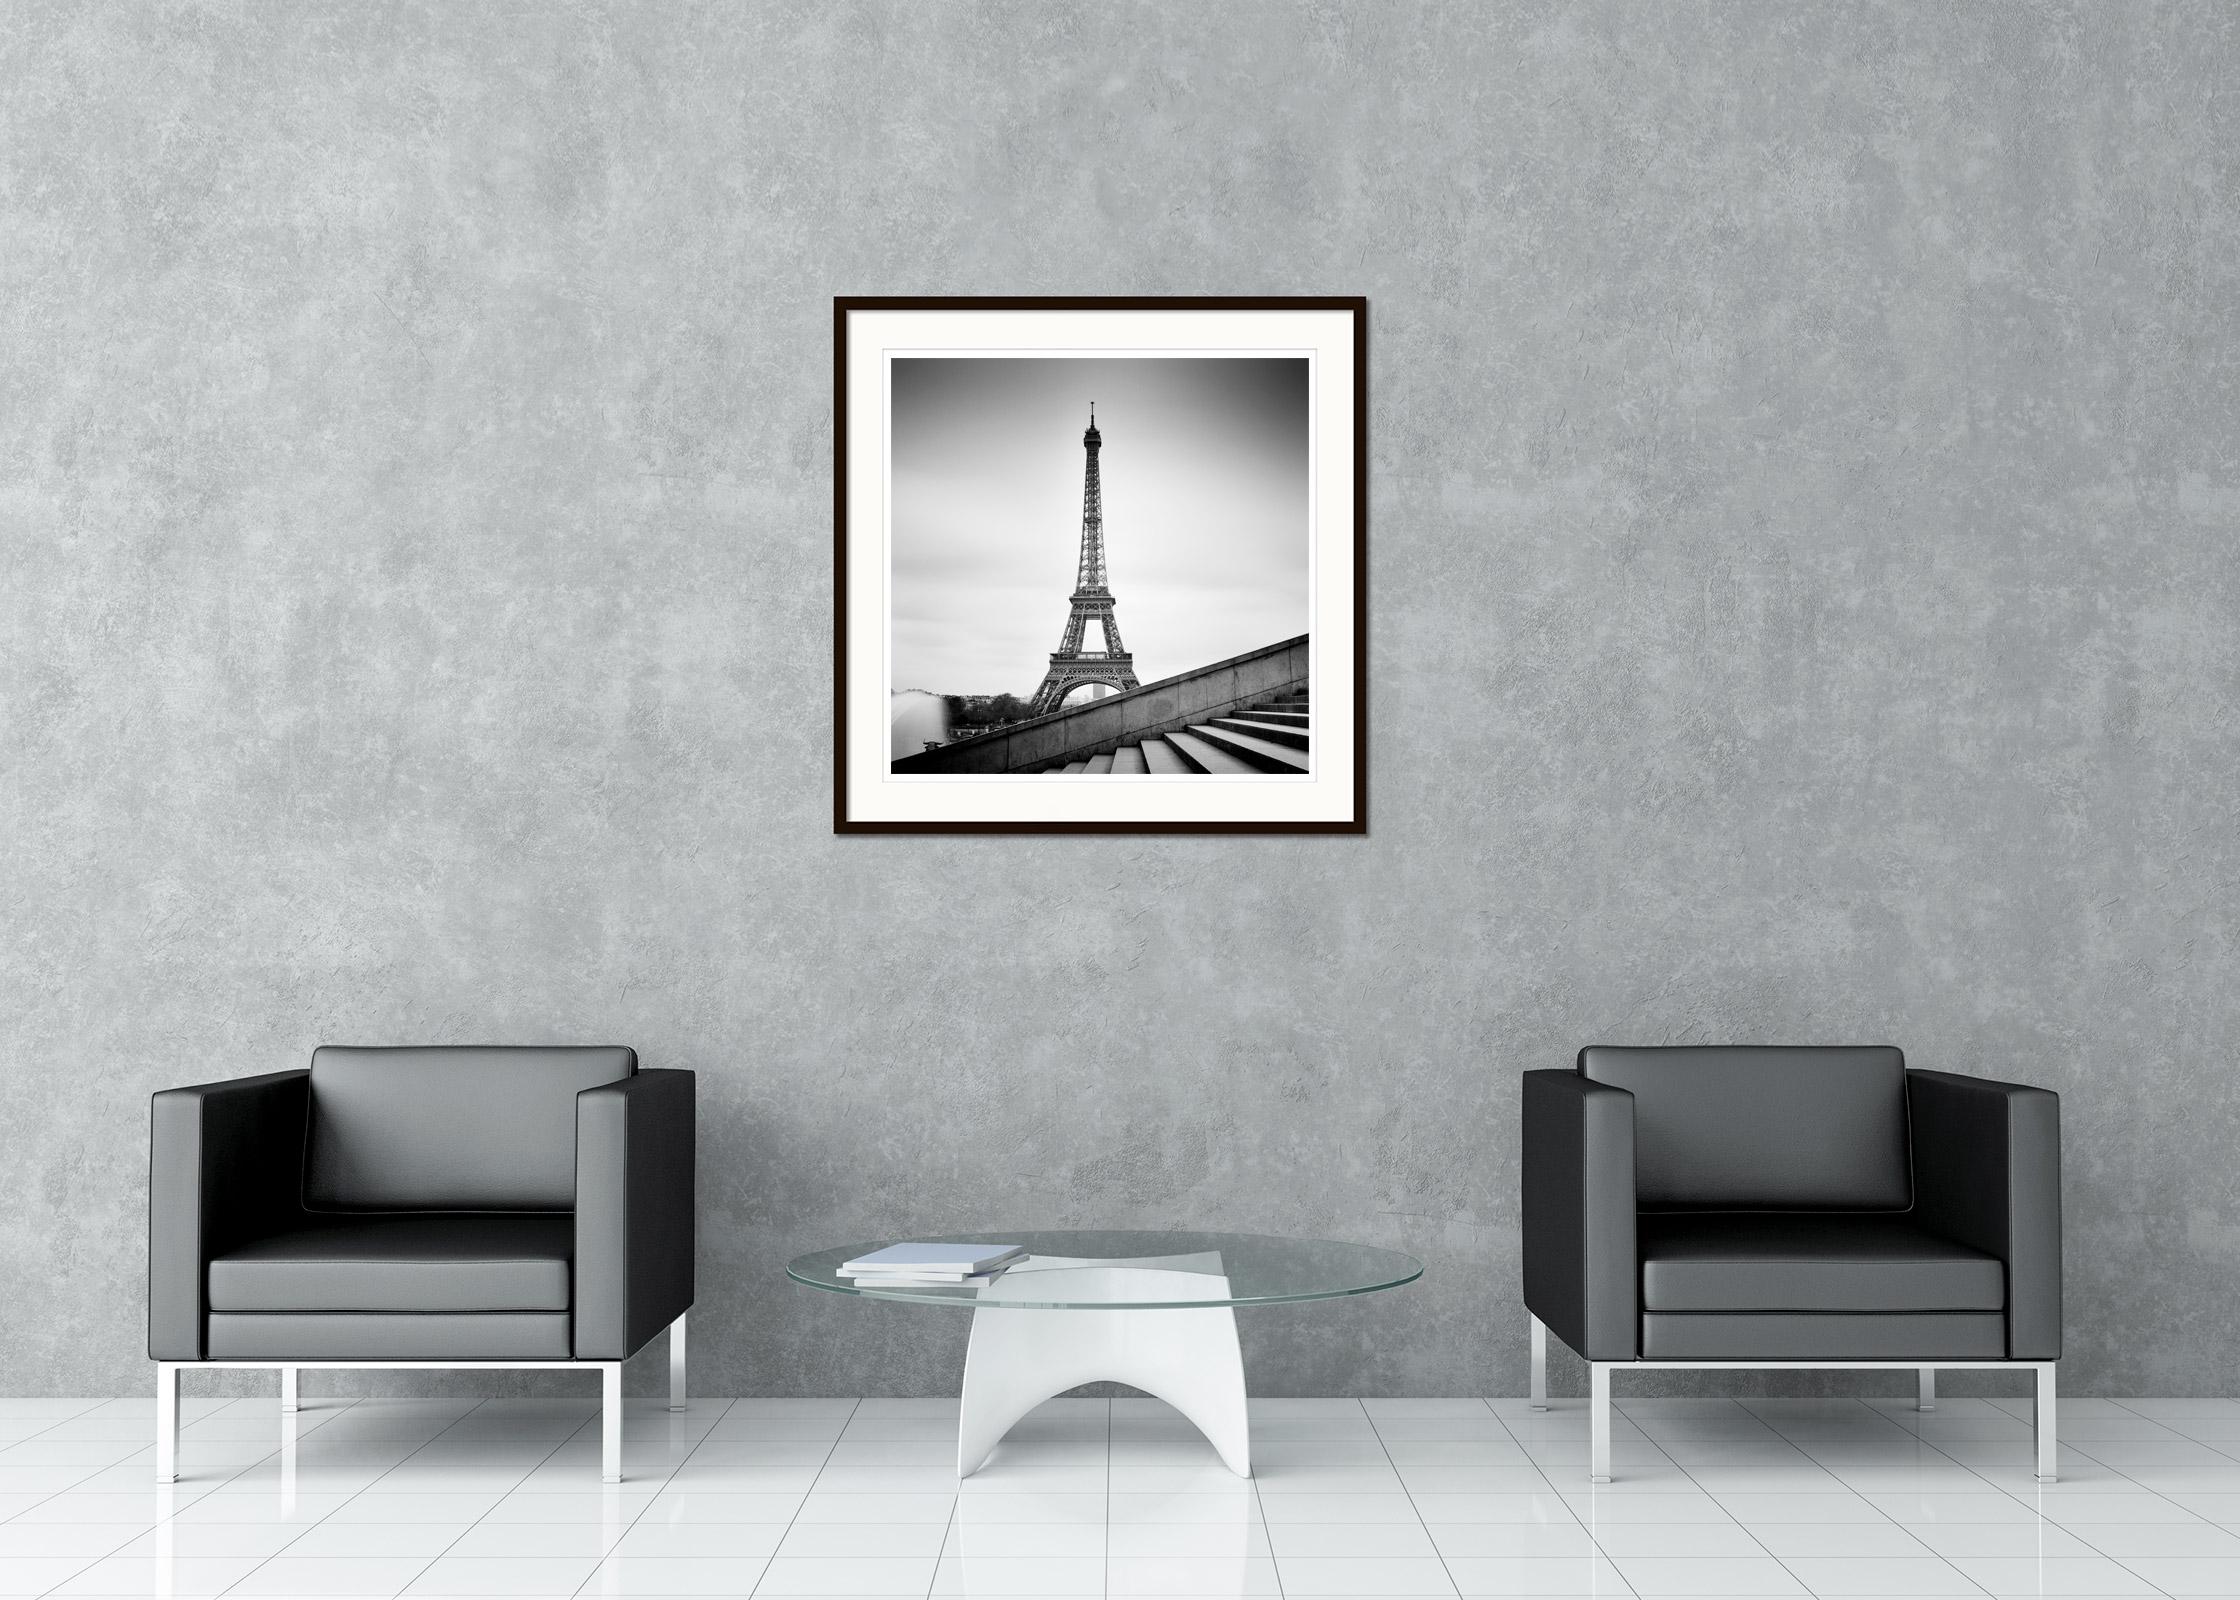 Eiffel Tower, Stairs at the Trocadero, Paris, black and white cityscape print - Gray Landscape Photograph by Gerald Berghammer